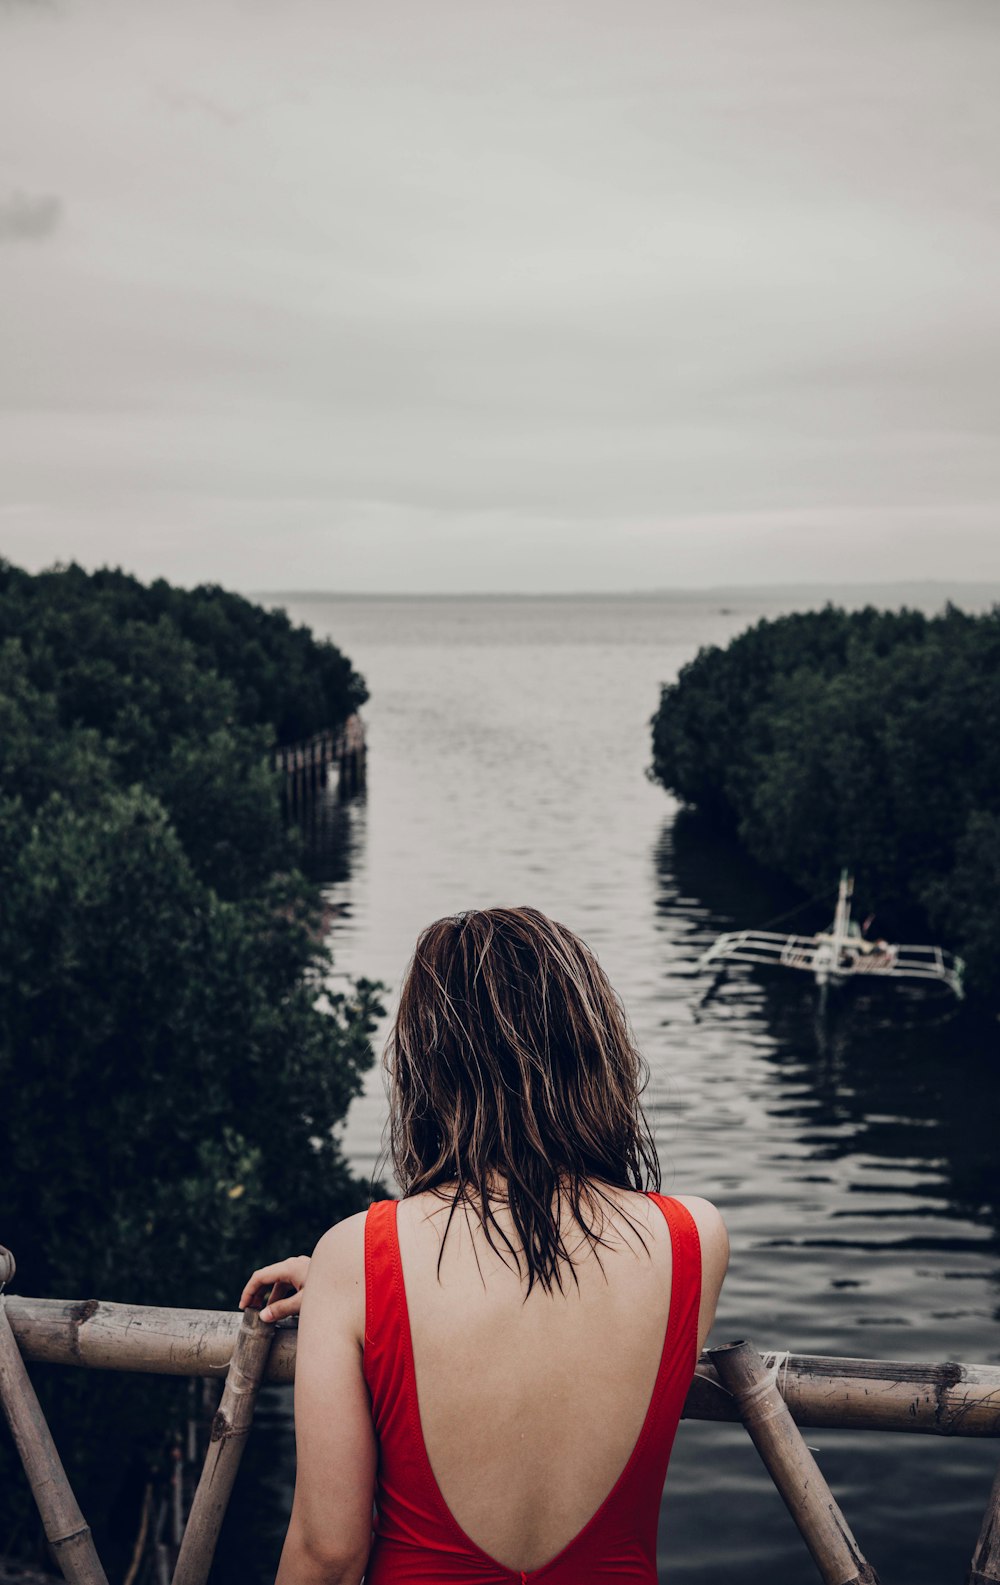 a woman looking out over a body of water